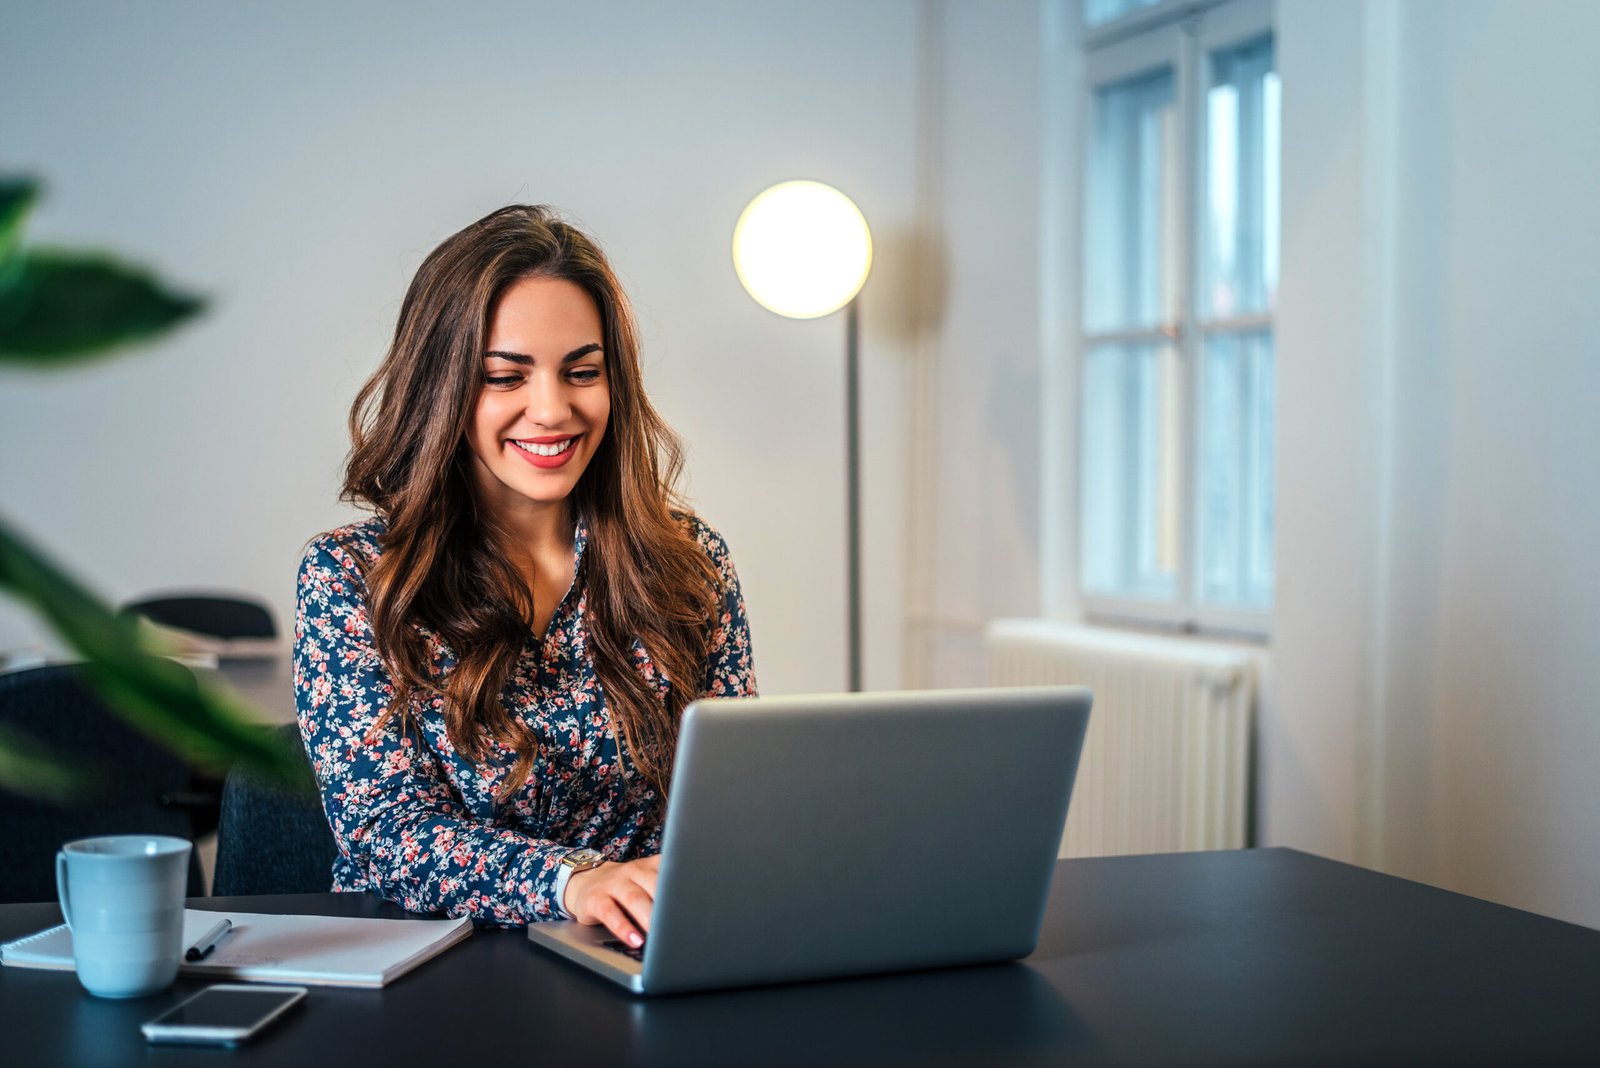 Cheerful woman using laptop at workplace.